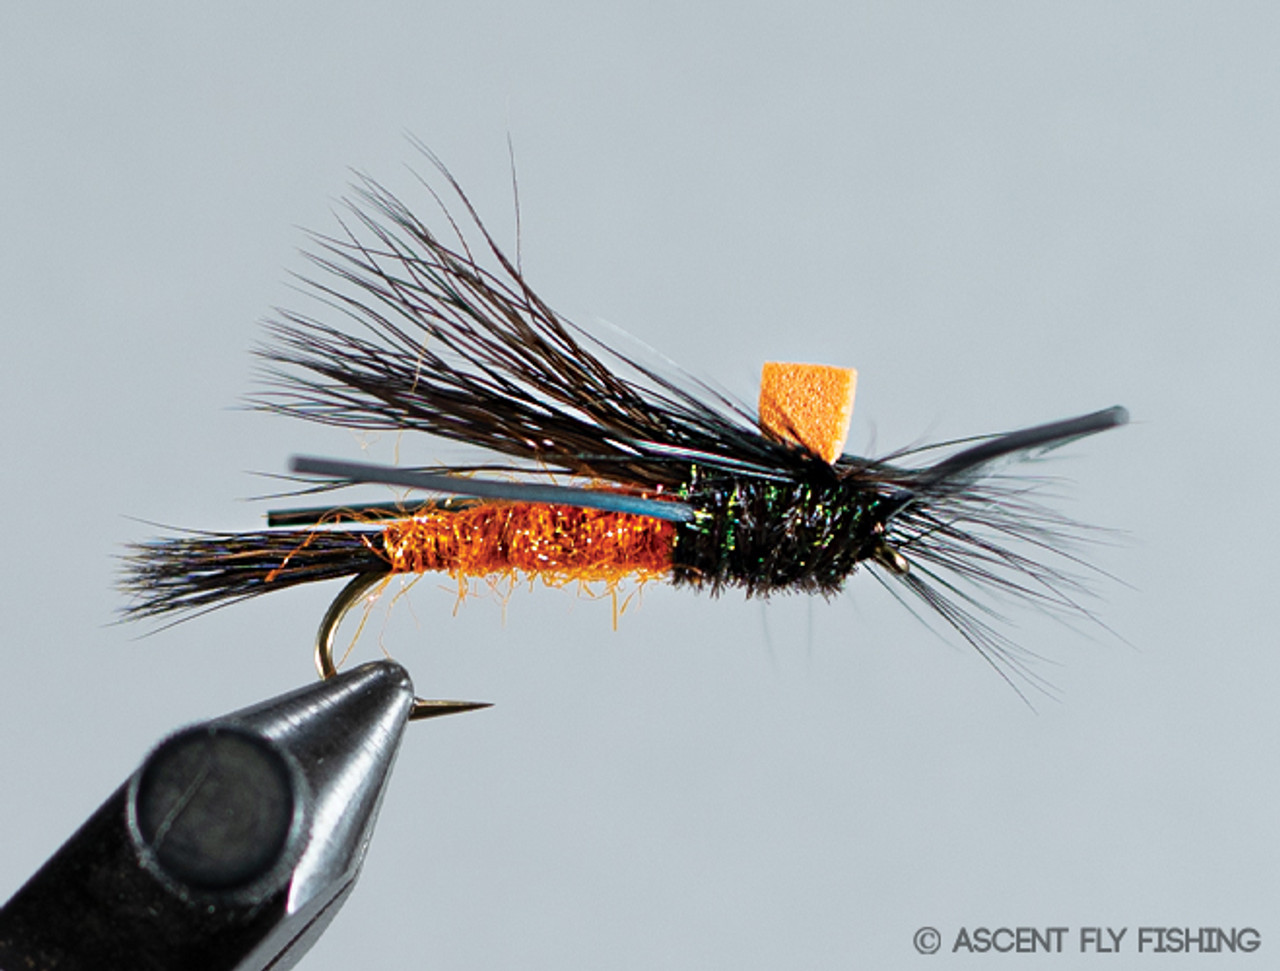 Adult Stone for Sale - $1.50/Fly